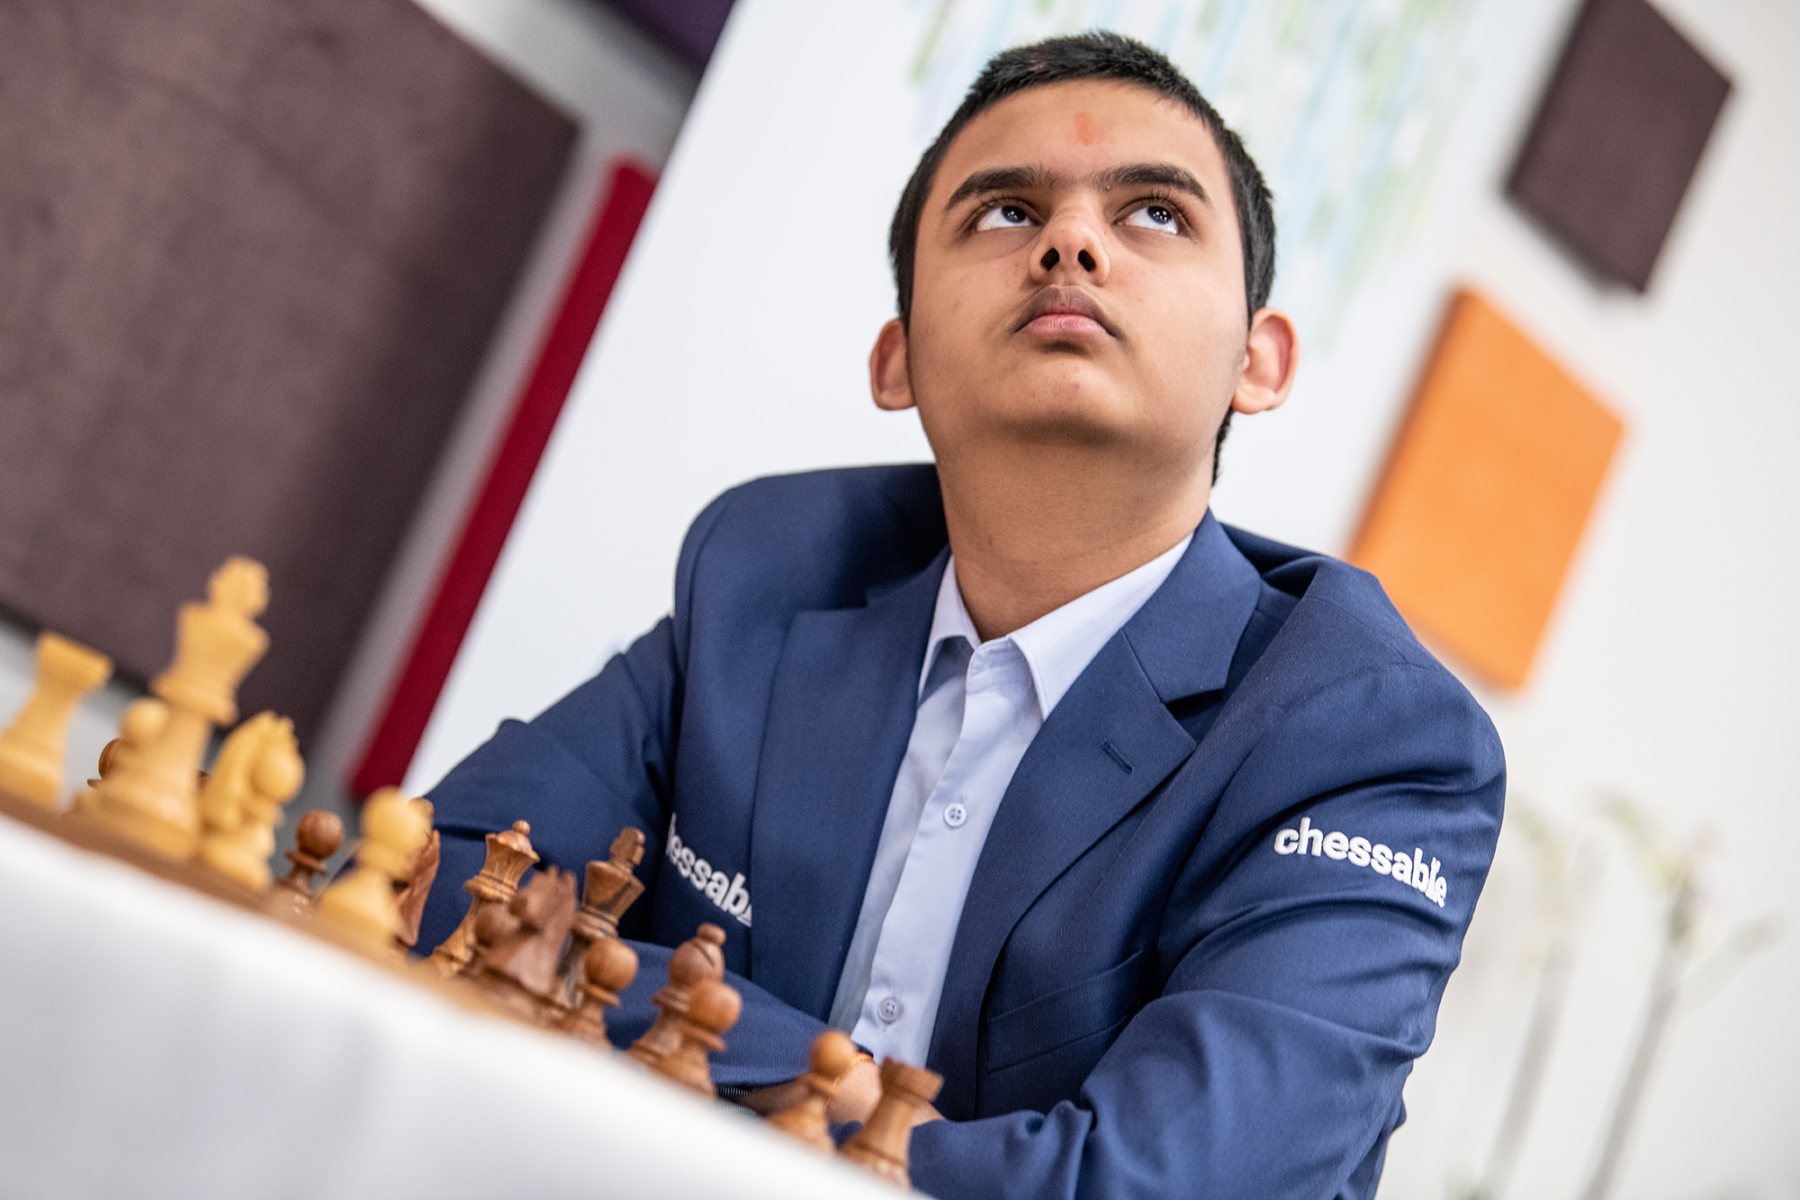 Youngest chess grandmaster in history comes to Dortmund